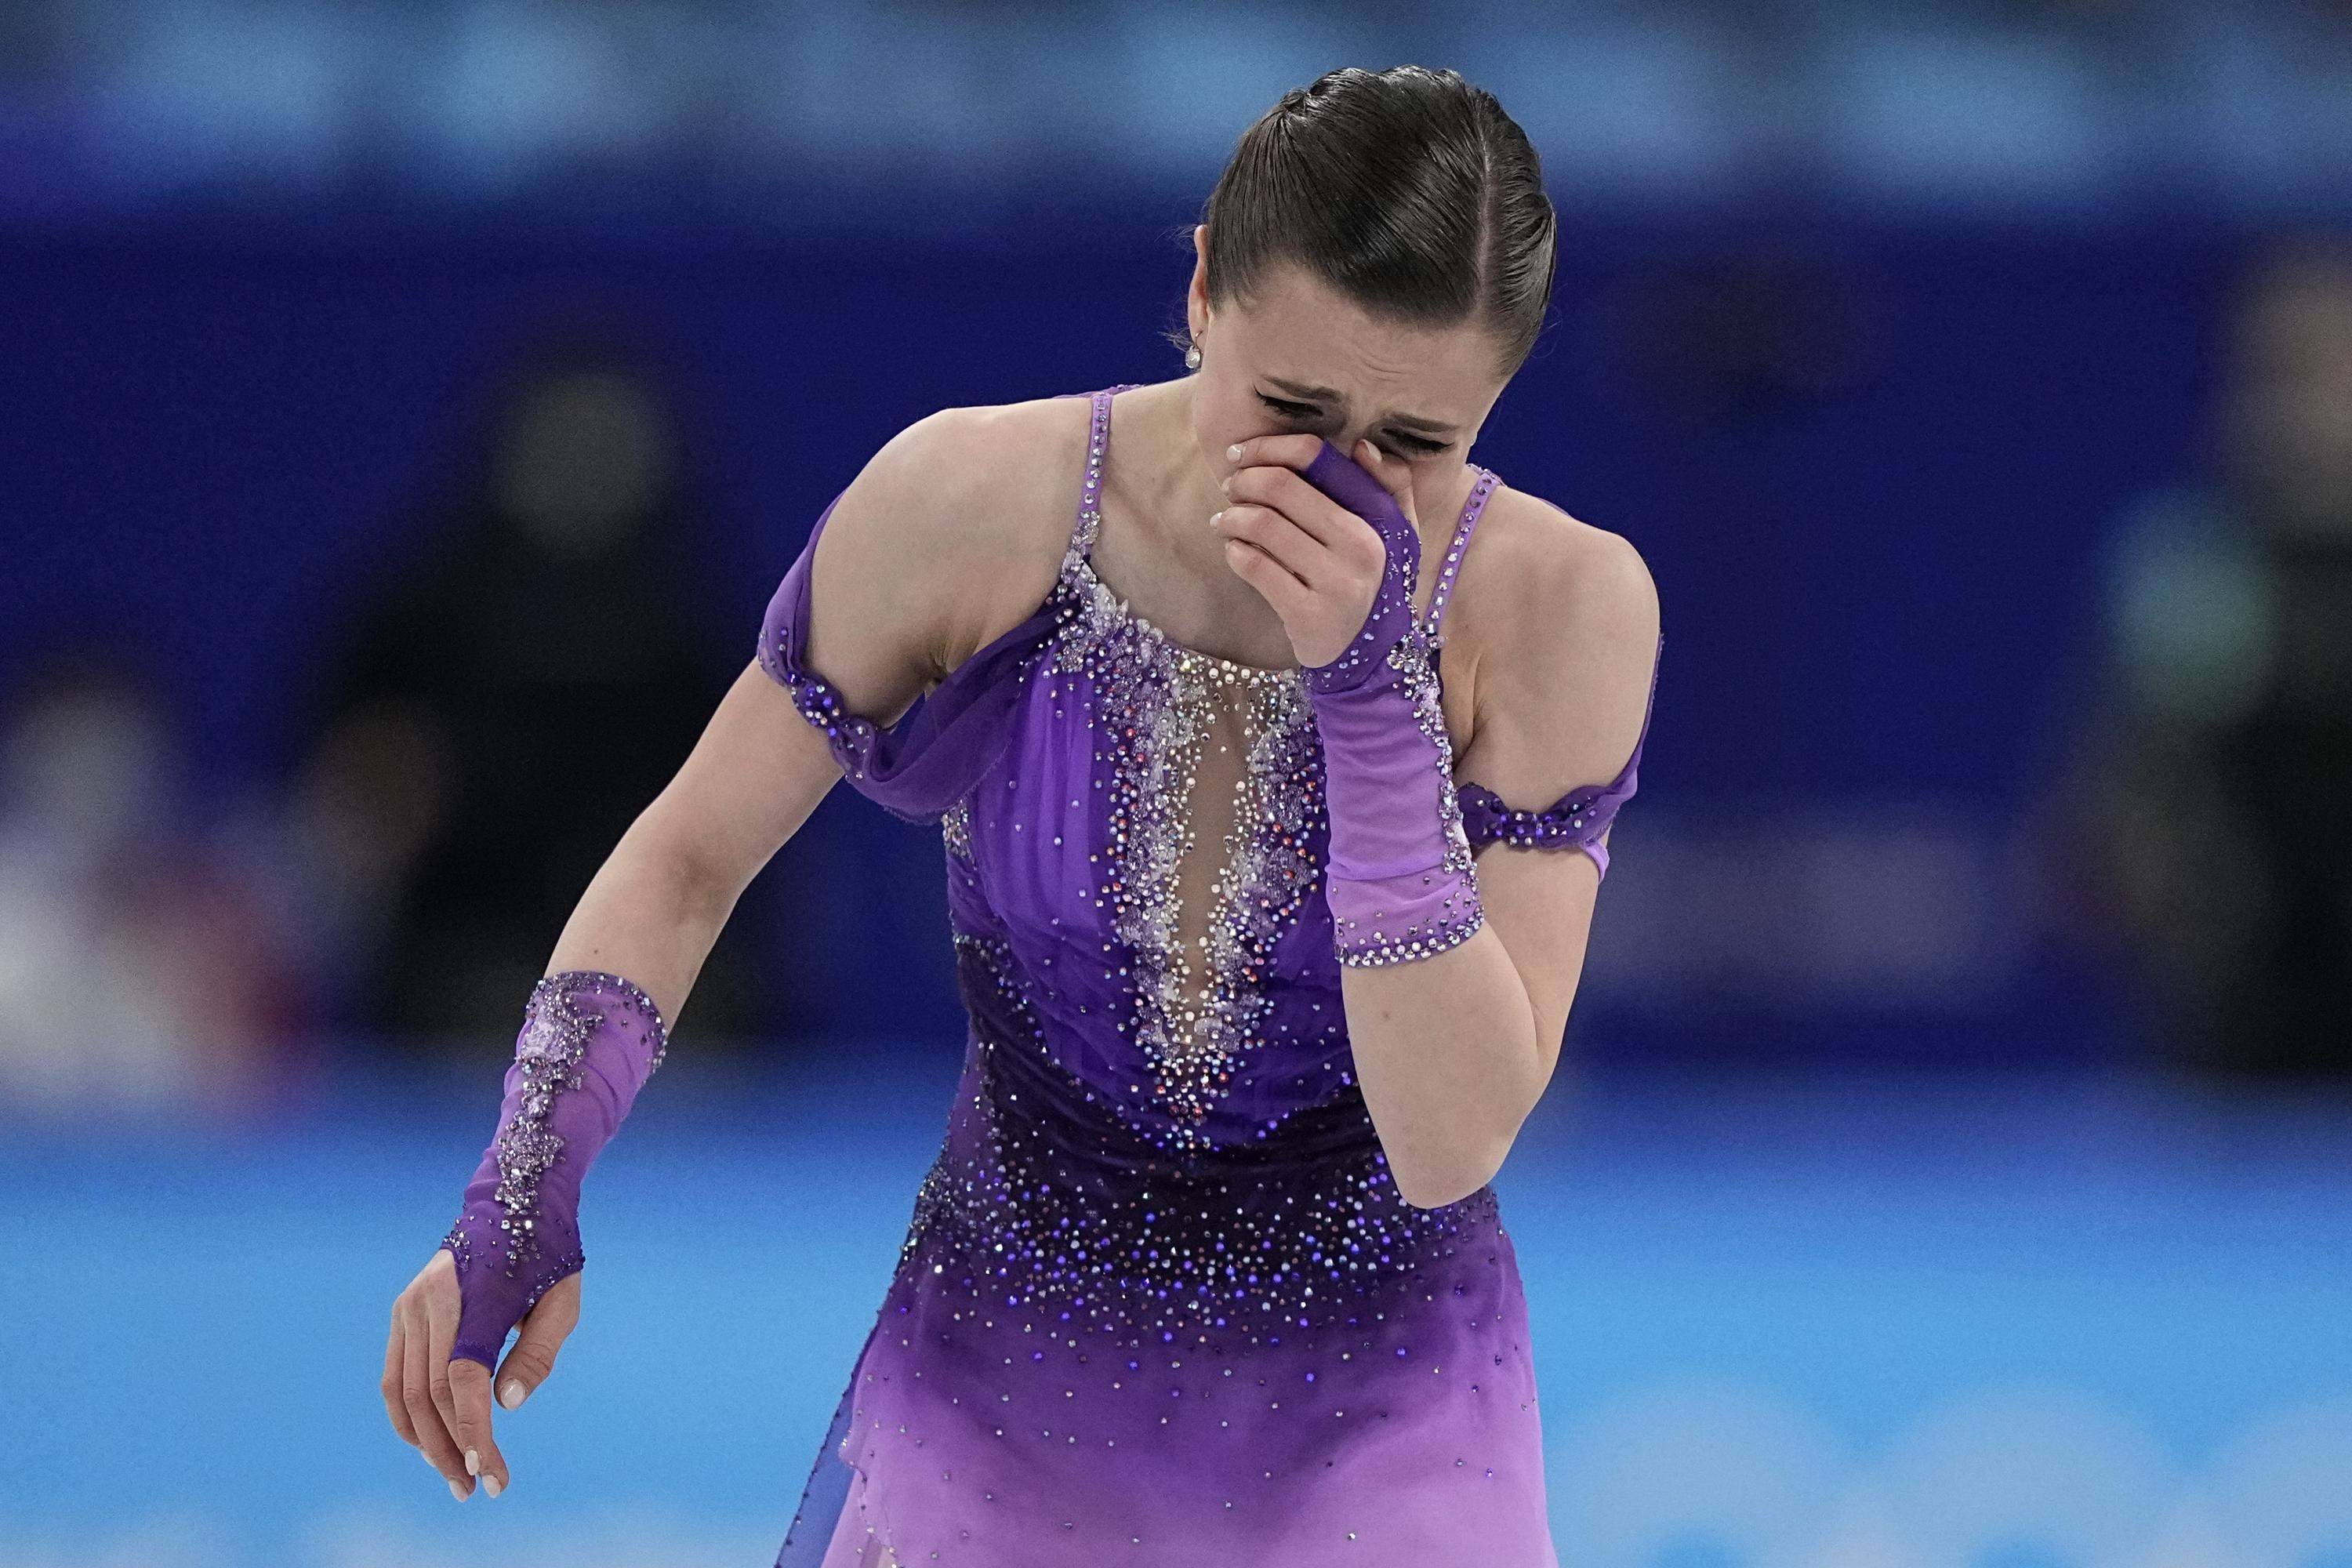 Single Skating: Kamila Valieva reacts in the women's short program during the figure skating at the 2022 Winter Olympics. 3000x2000 HD Background.